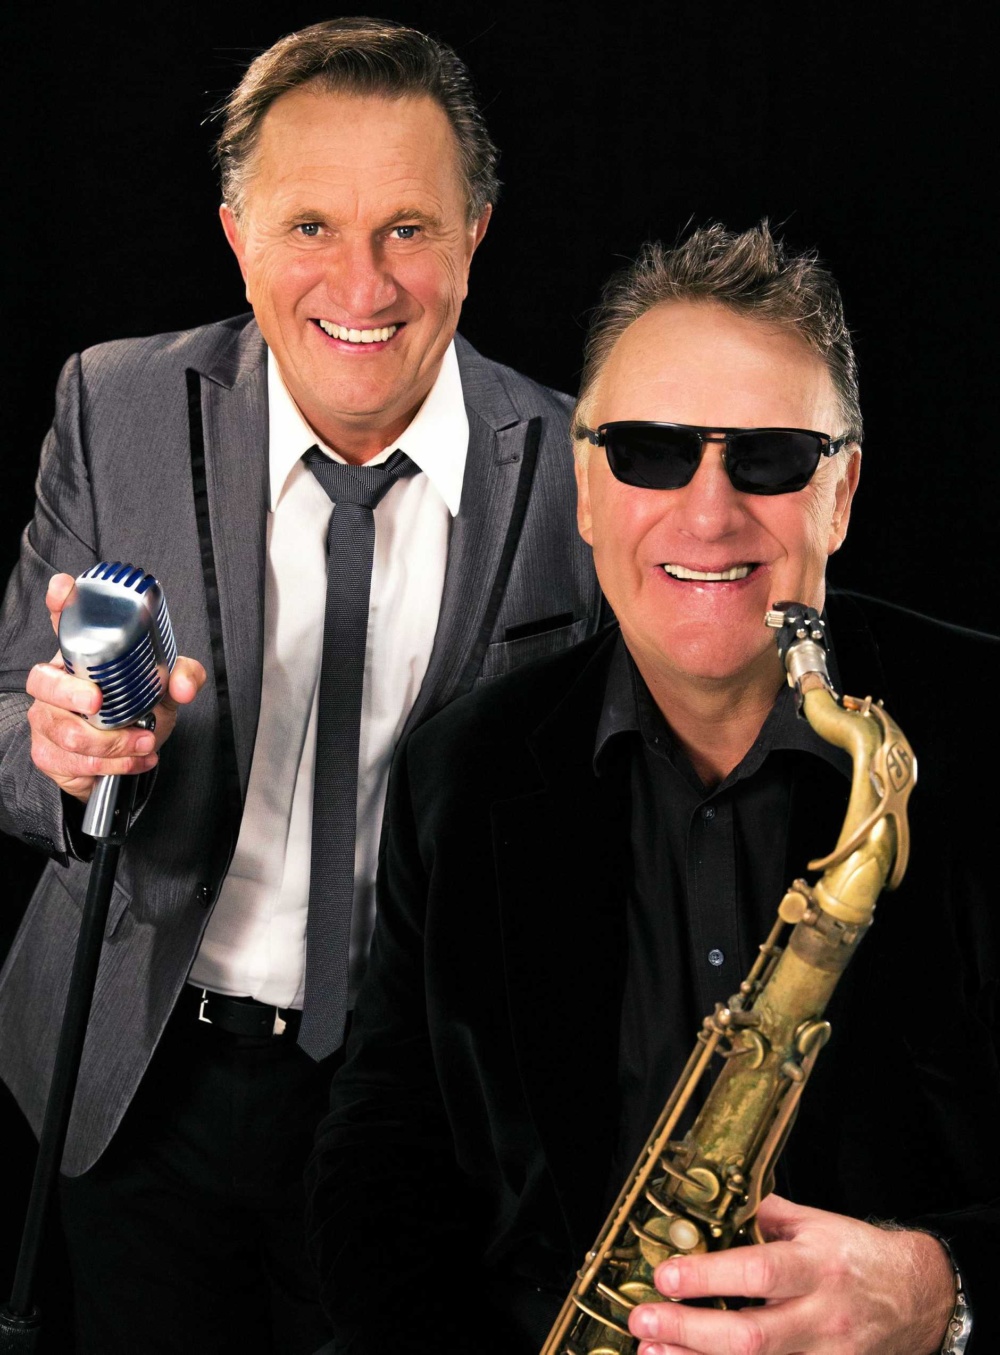 ON THE PROWL! Frankie J Holden & Wilbur Wilde, & The '55 Band - PUBLIC HOLIDAY EVE Dinner & Show